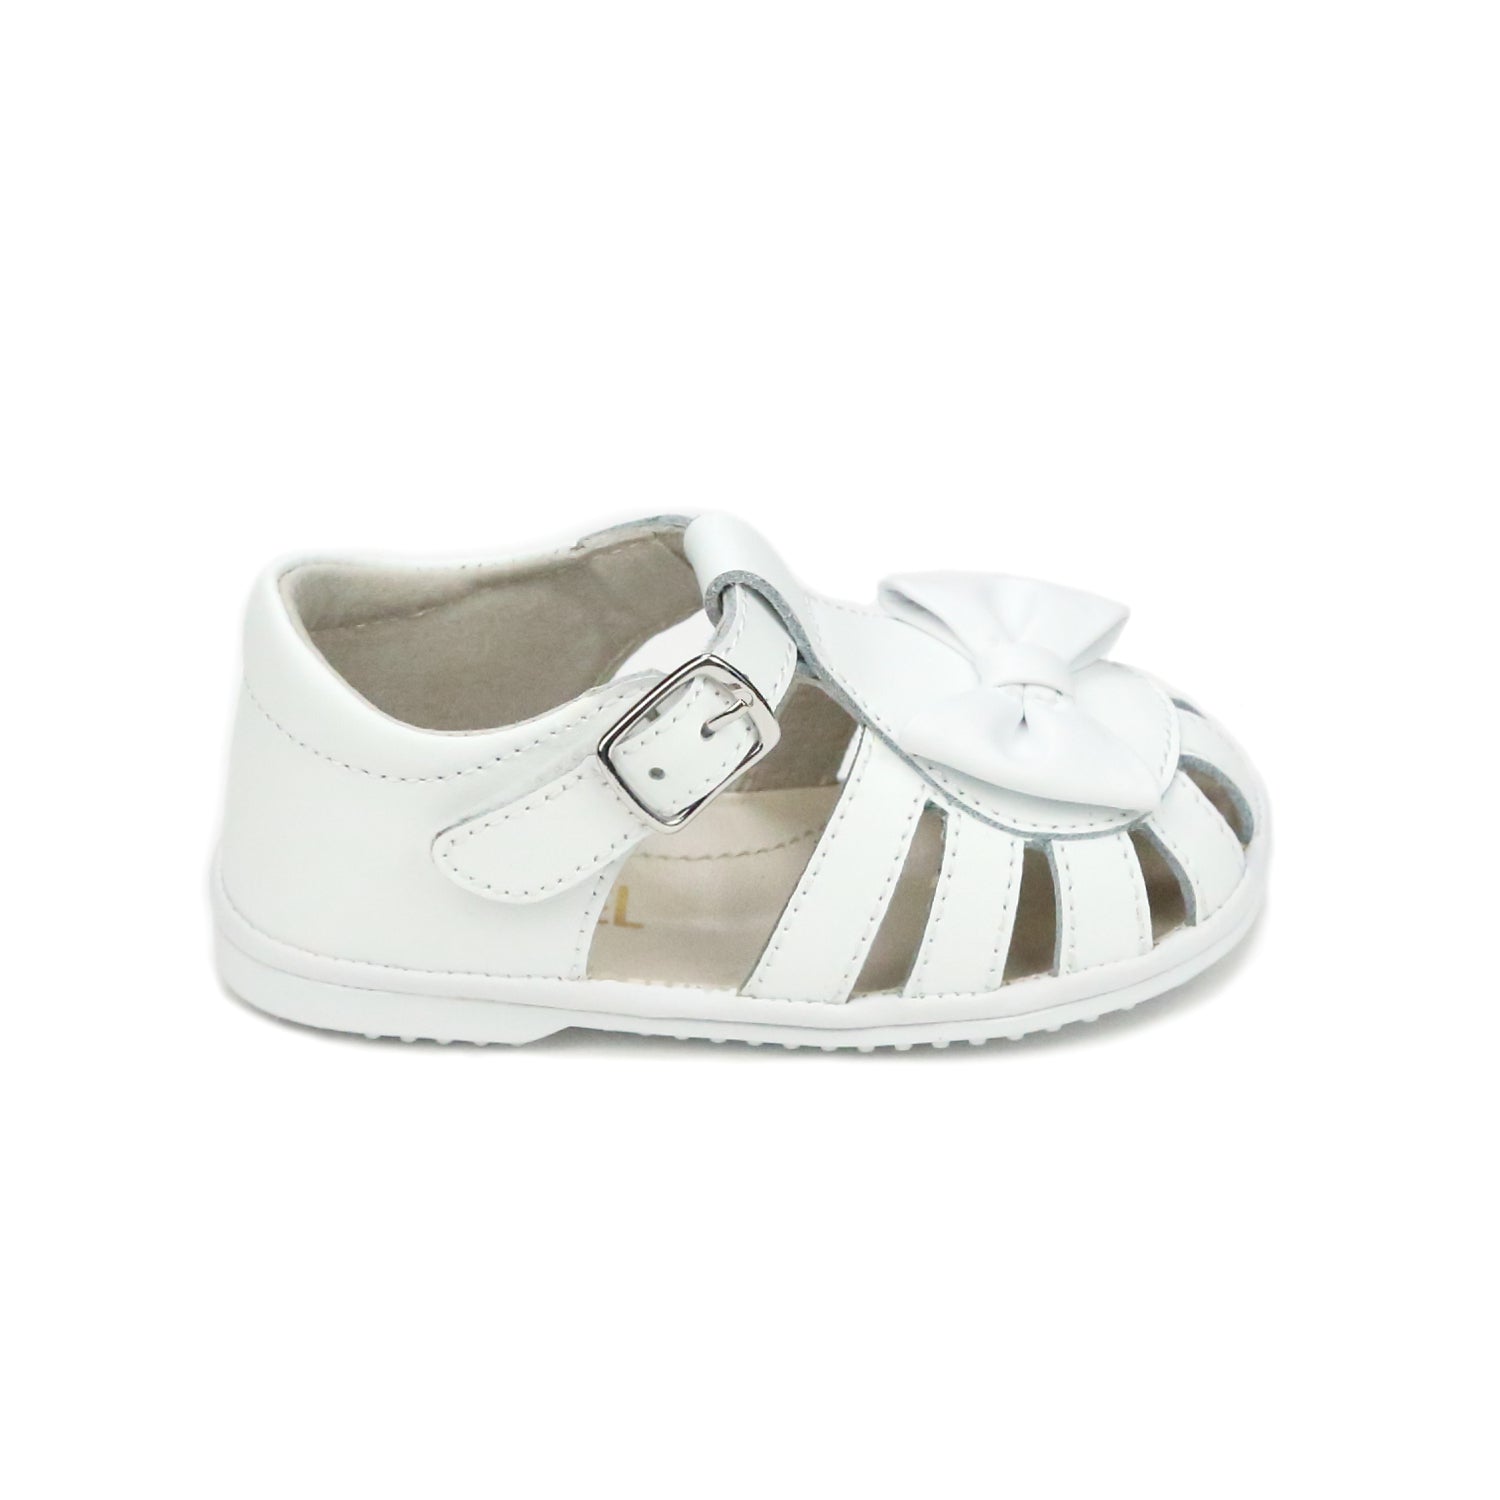 Nellie Bow Sandal - Babies & Toddlers